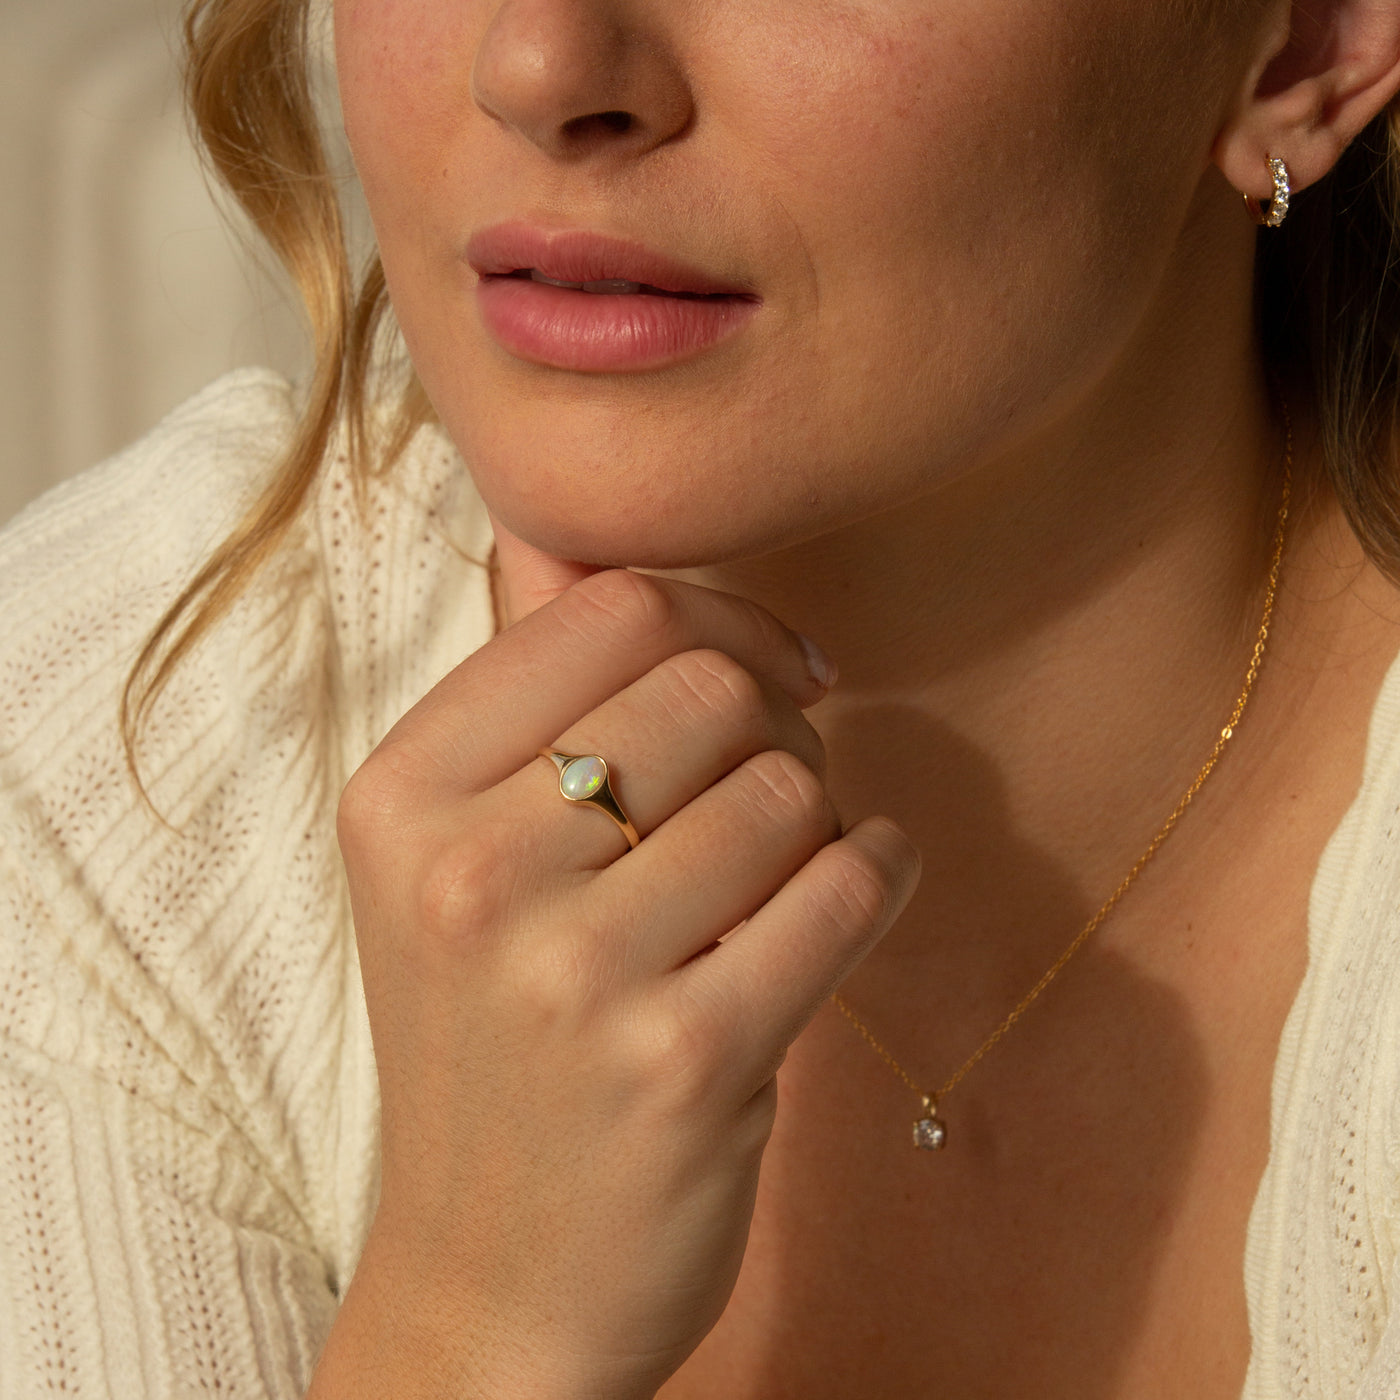 Opal Signet Ring | Simple & Dainty Jewelry